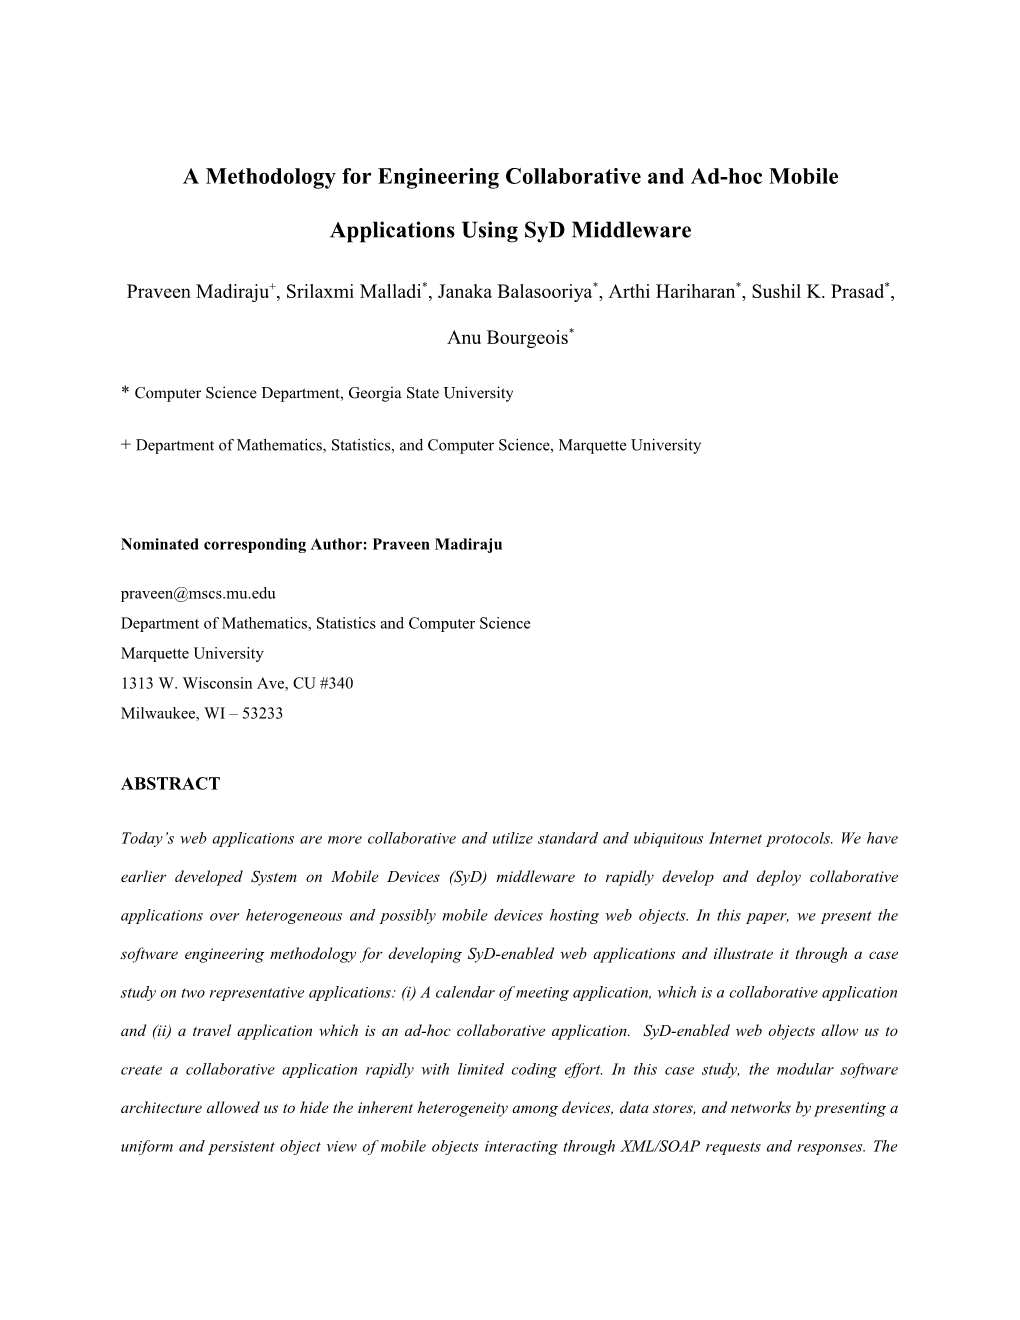 A Generic Design Methodology for Collaborative and Ad-Hoc Mobile Applications